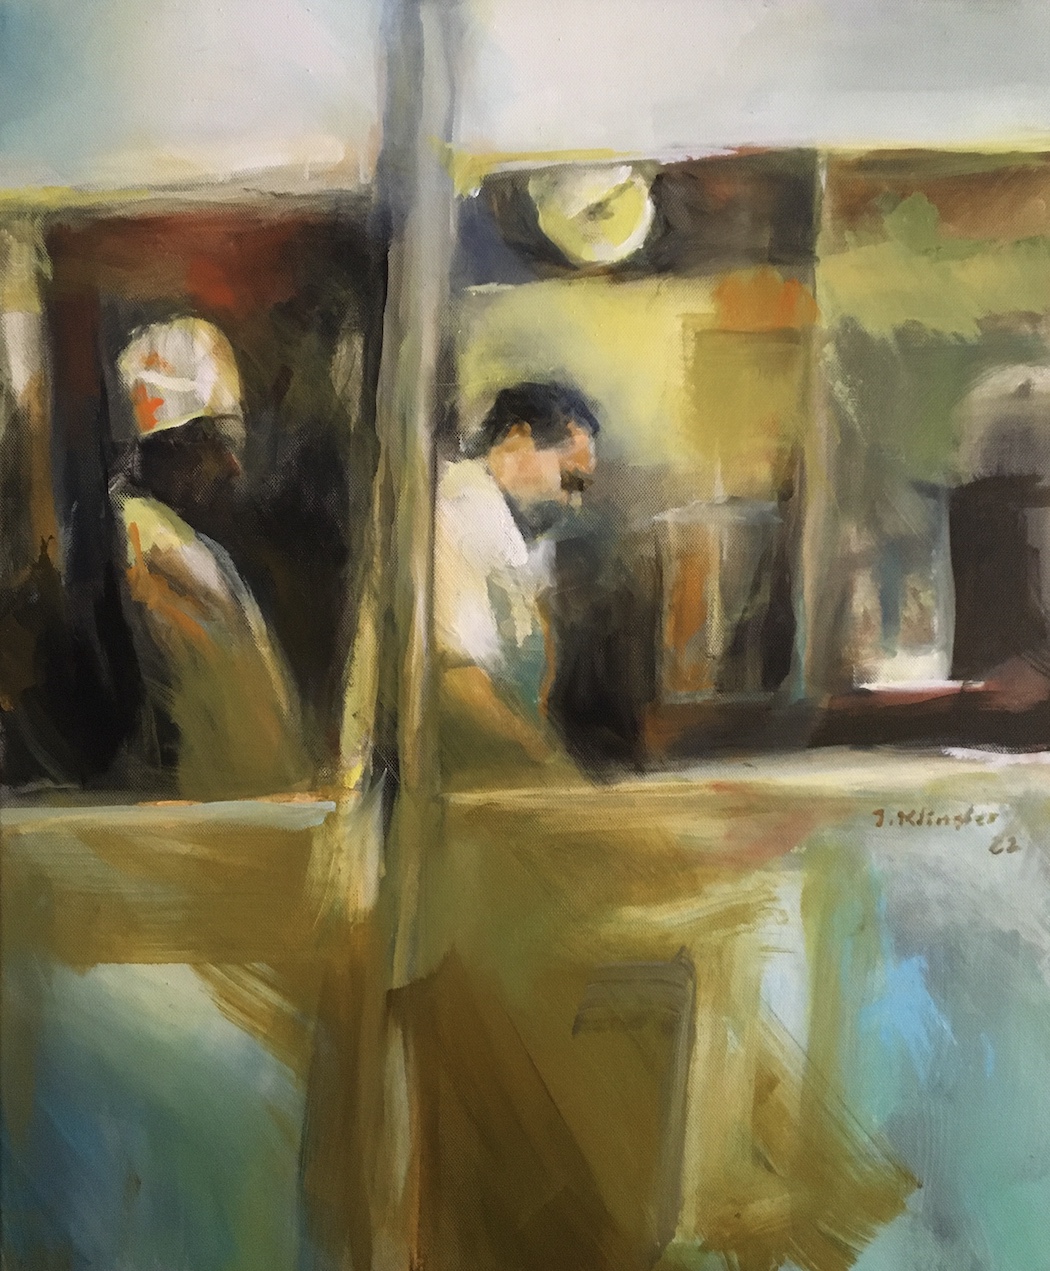 Industry Kitchen, painting by J.Klingler, Oil on Canvas, 50x60cm, Commission 900.-